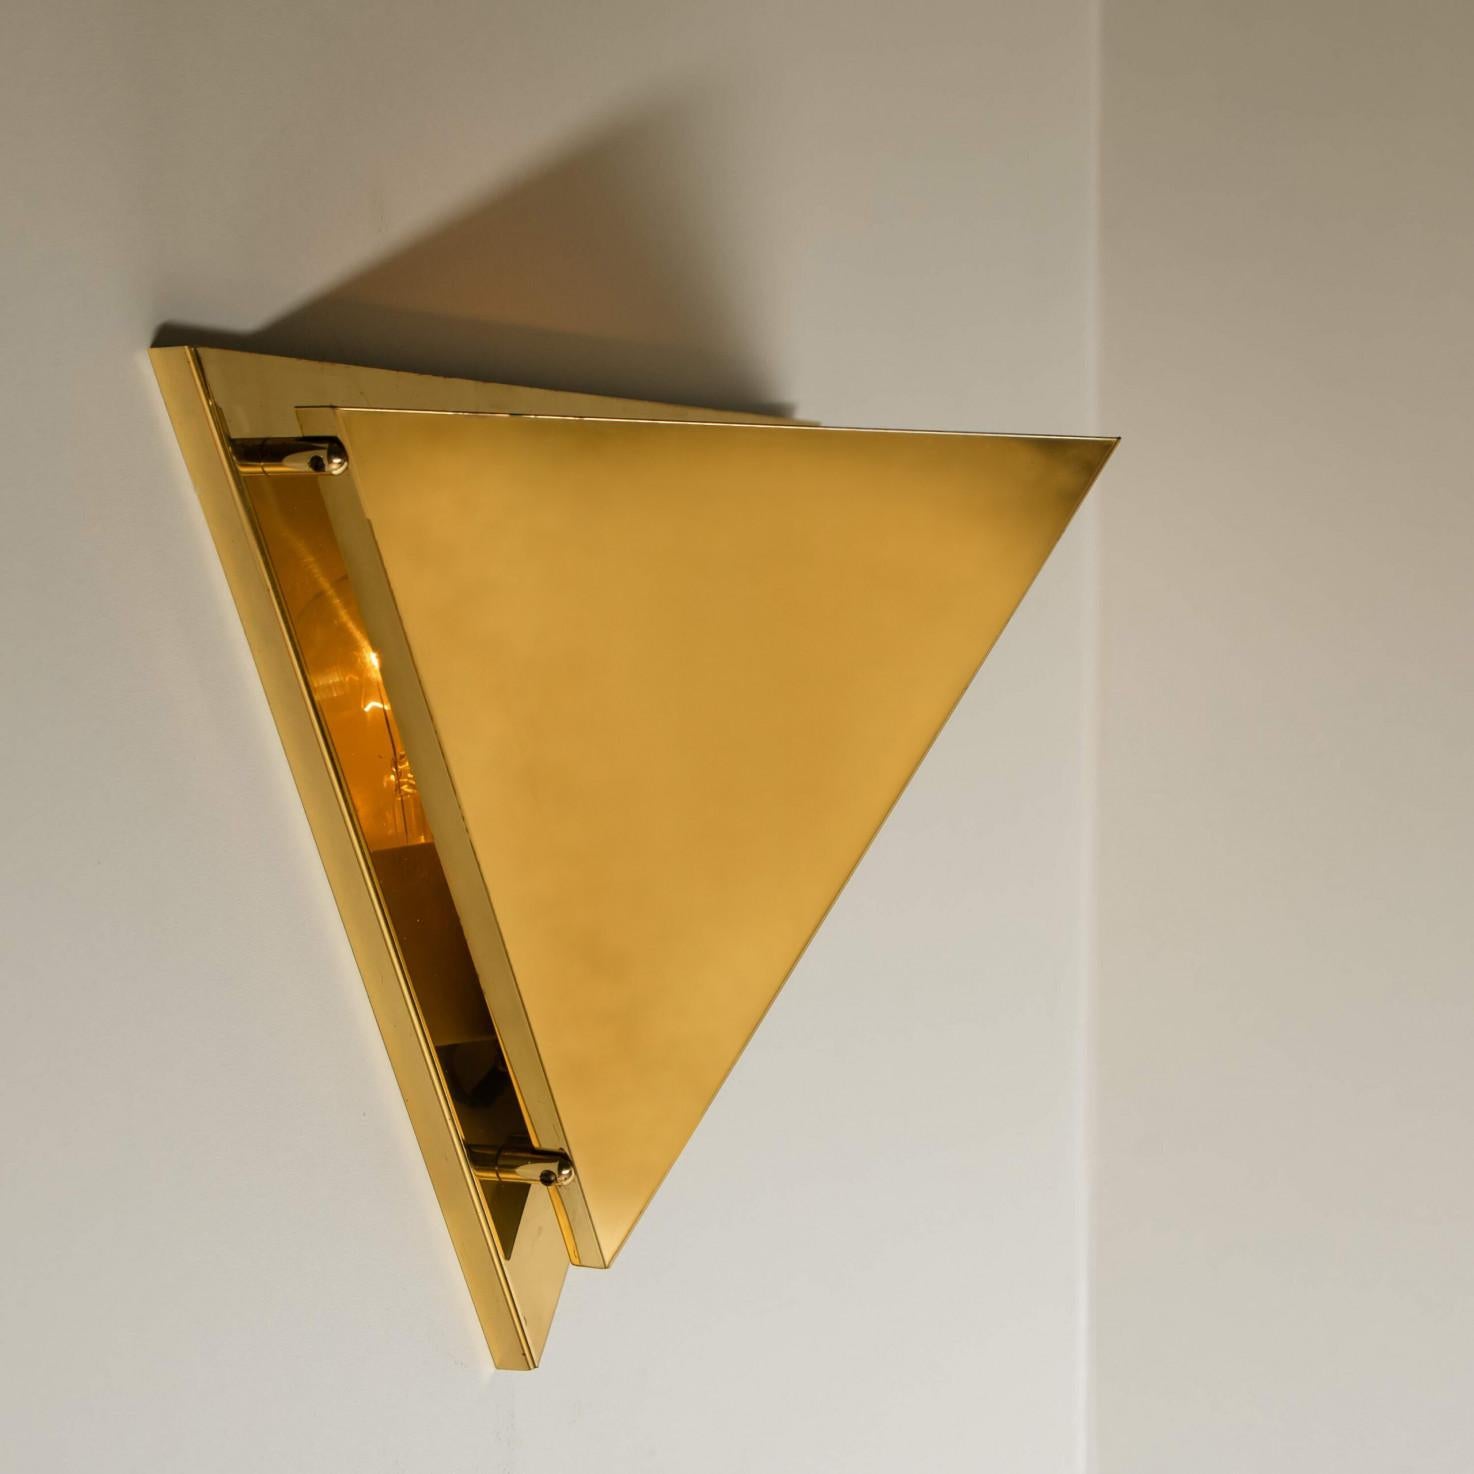 1 of the 5 Pyramid Shaped Massive Brass Wall Lamps, 1970s For Sale 4